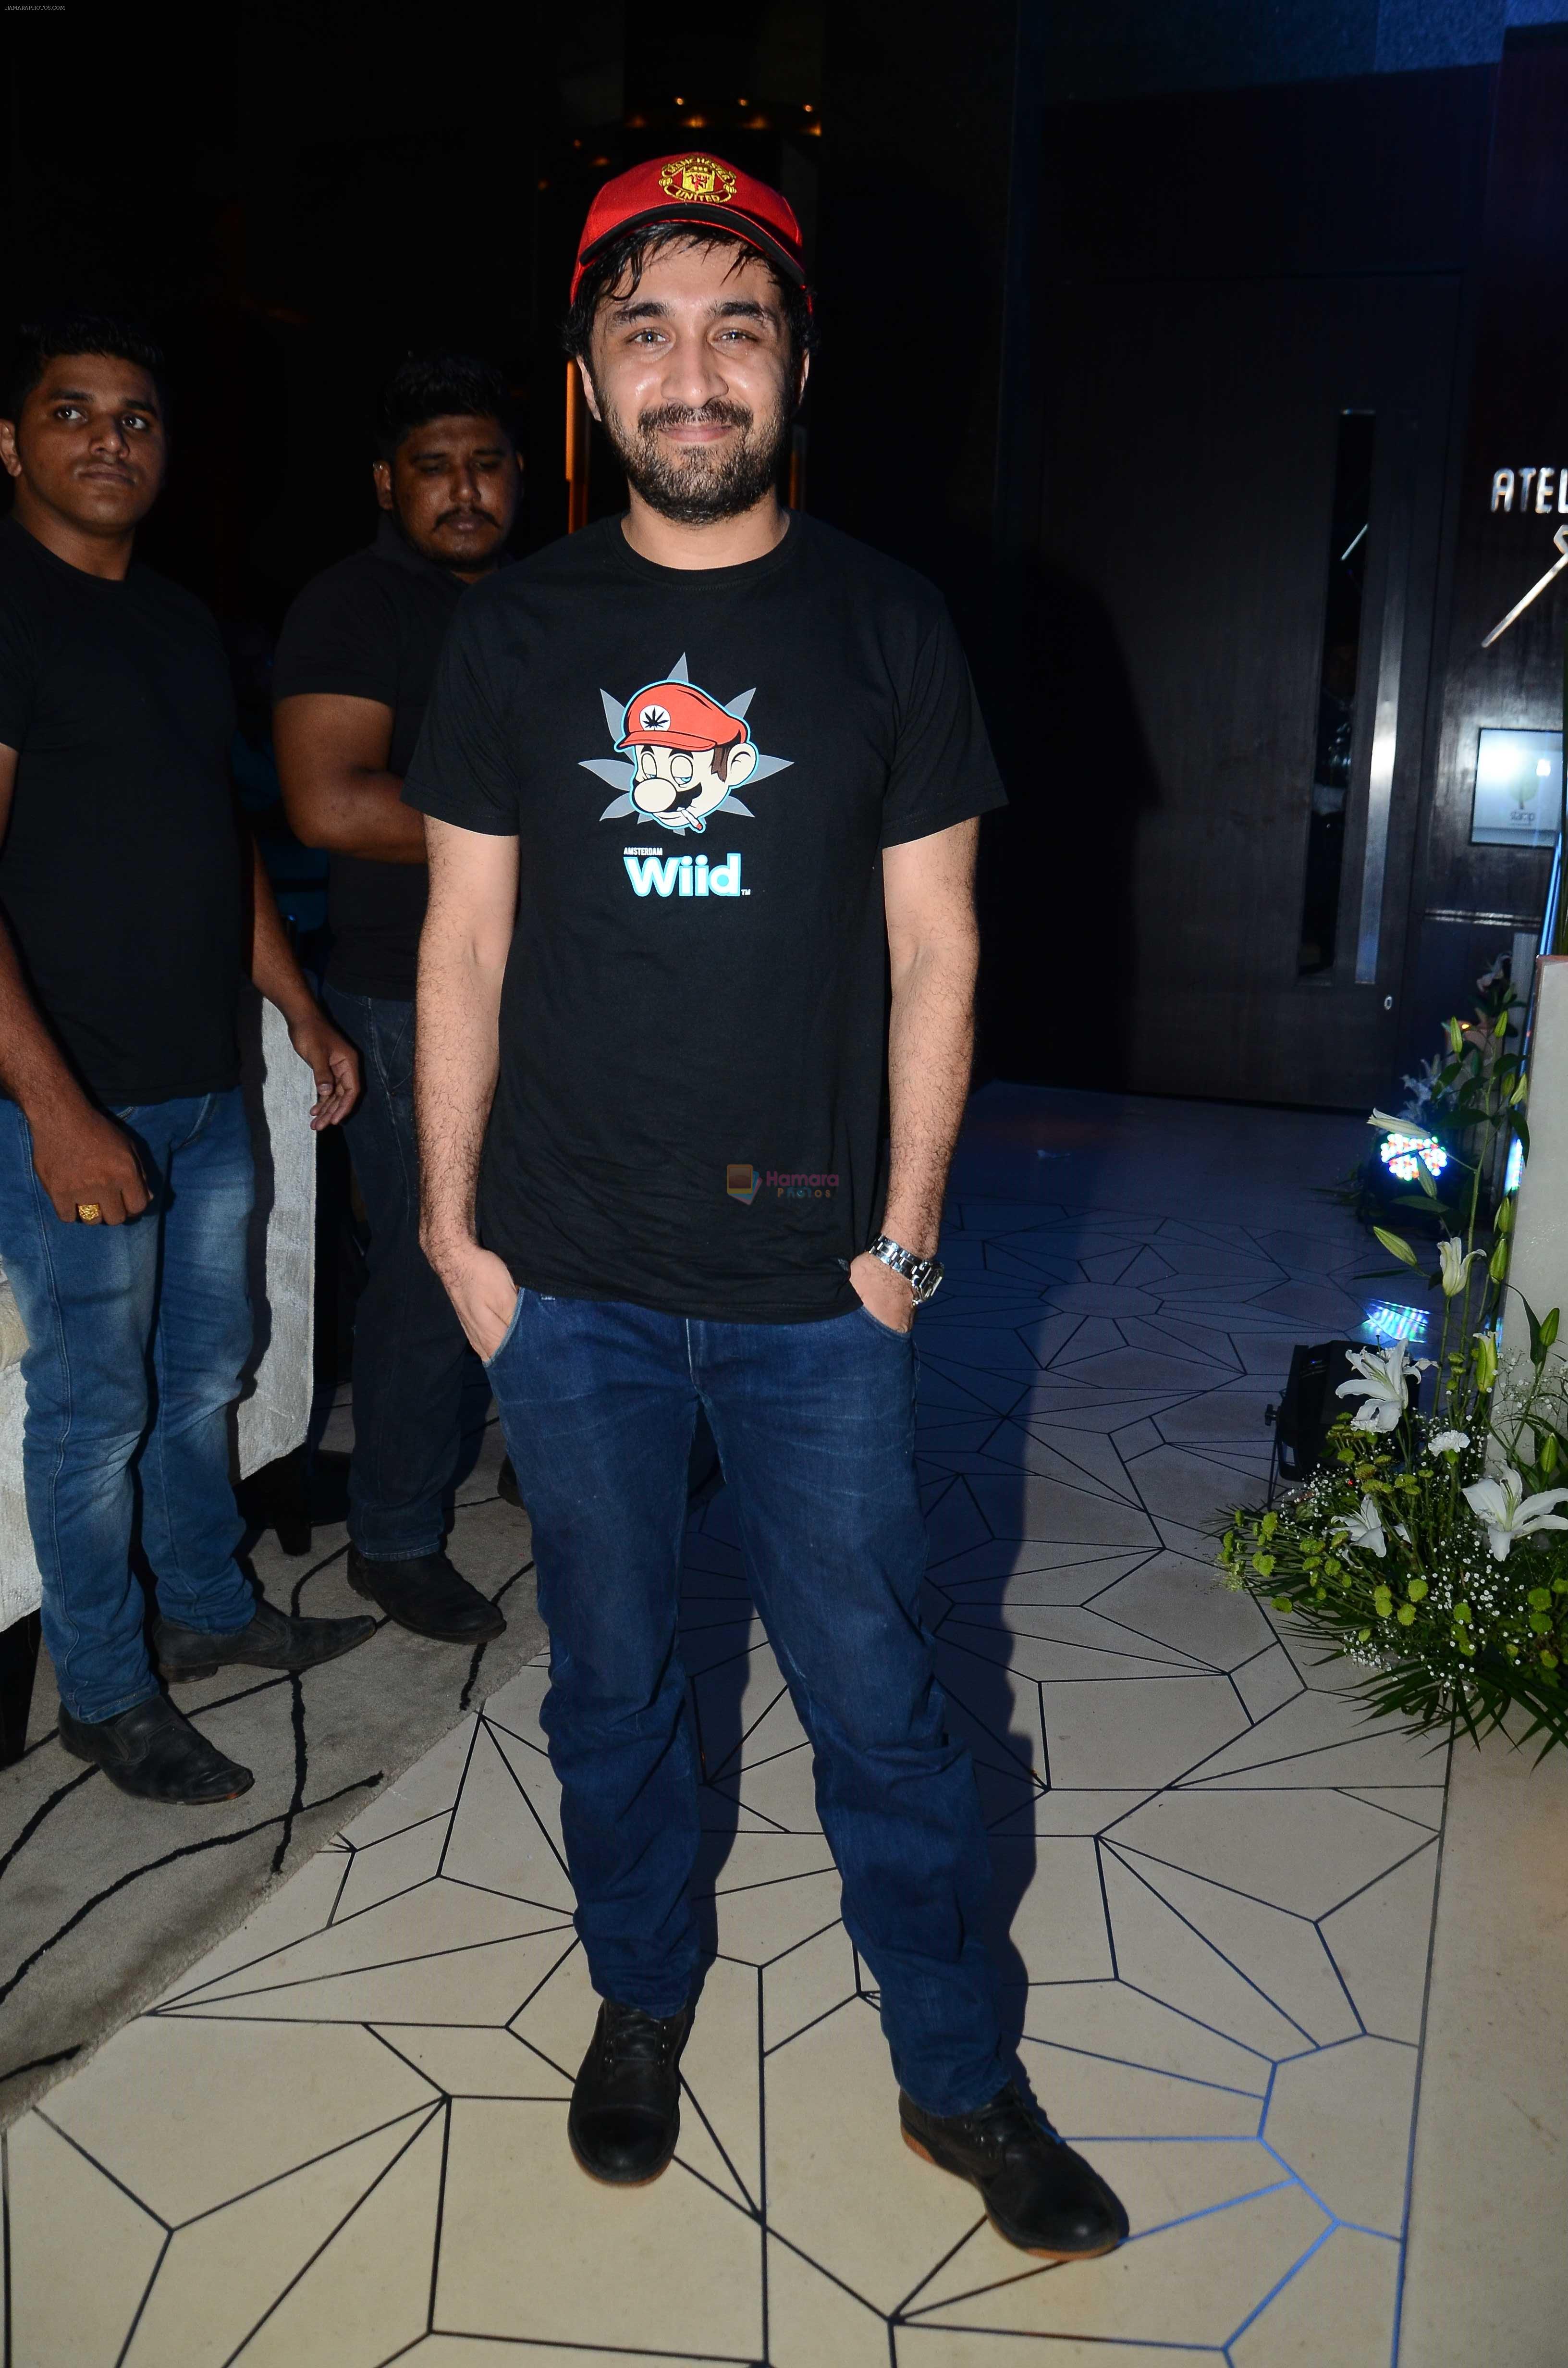 Siddhanth Kapoor during the party orgnised by Tanishaa Mukerji on behalf of her NGO STAMP in Mumbai, India on July 23, 2016